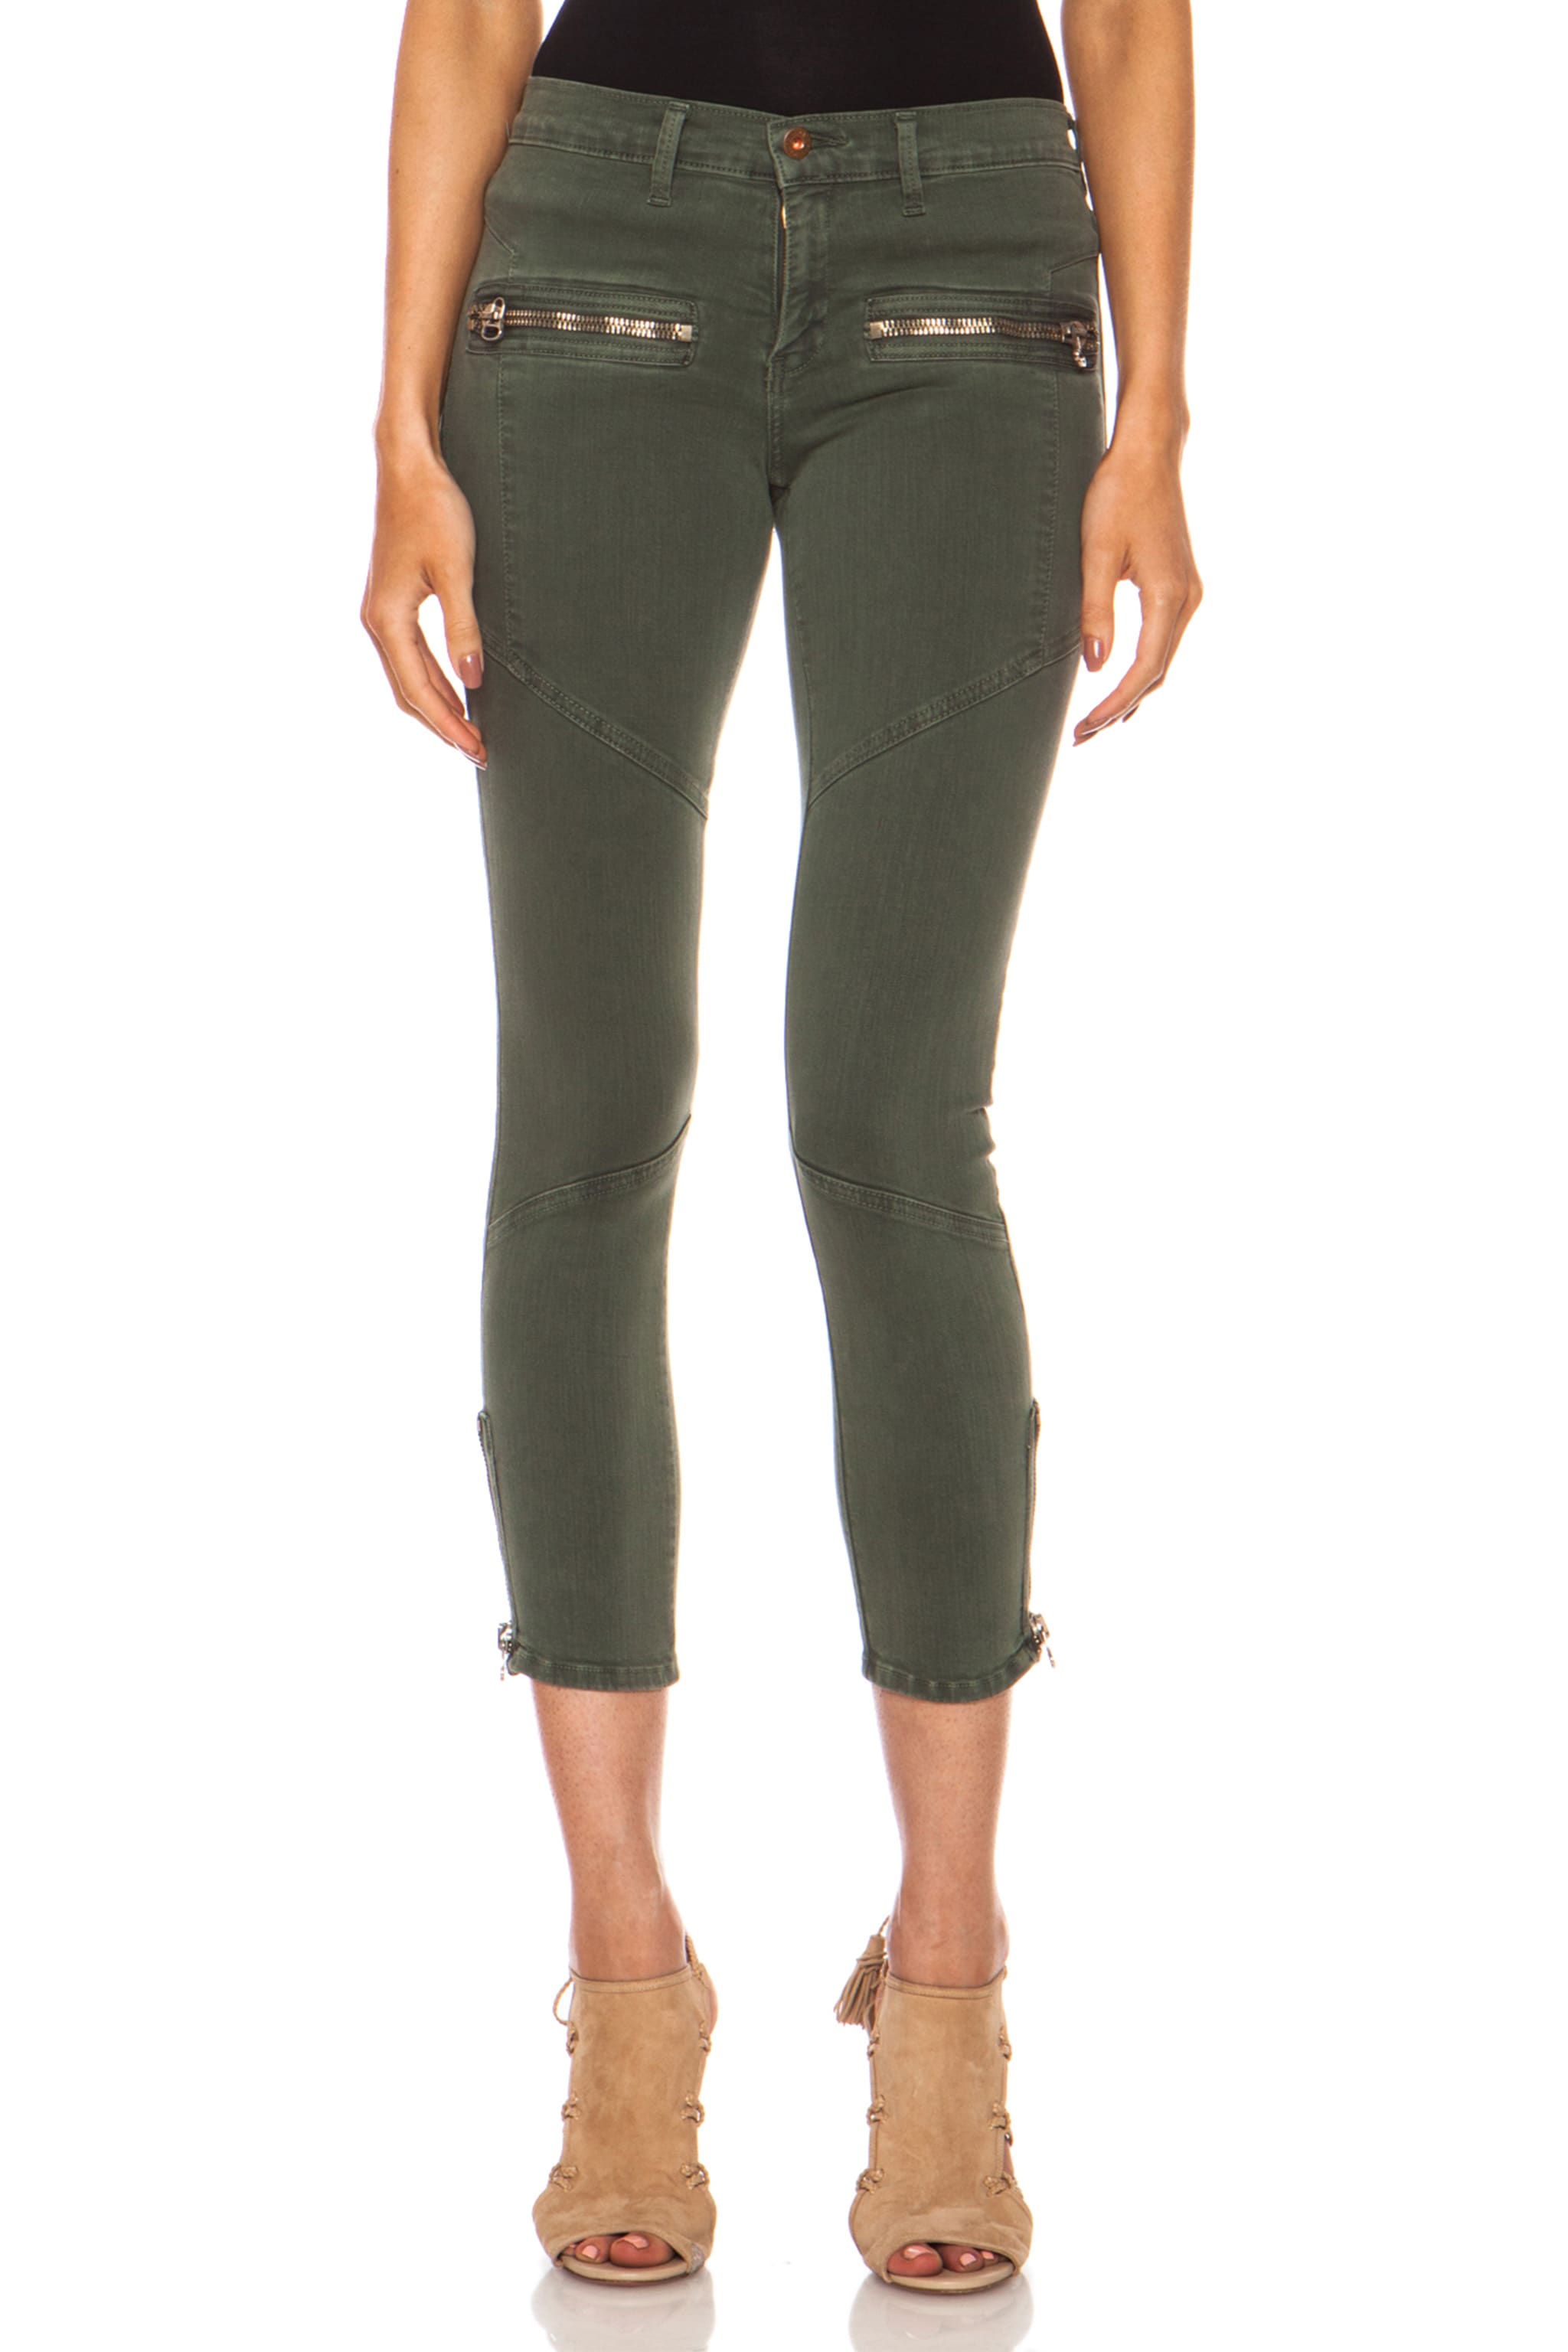 Image 1 of NSF Shay Cotton-Blend Pant in Fargo